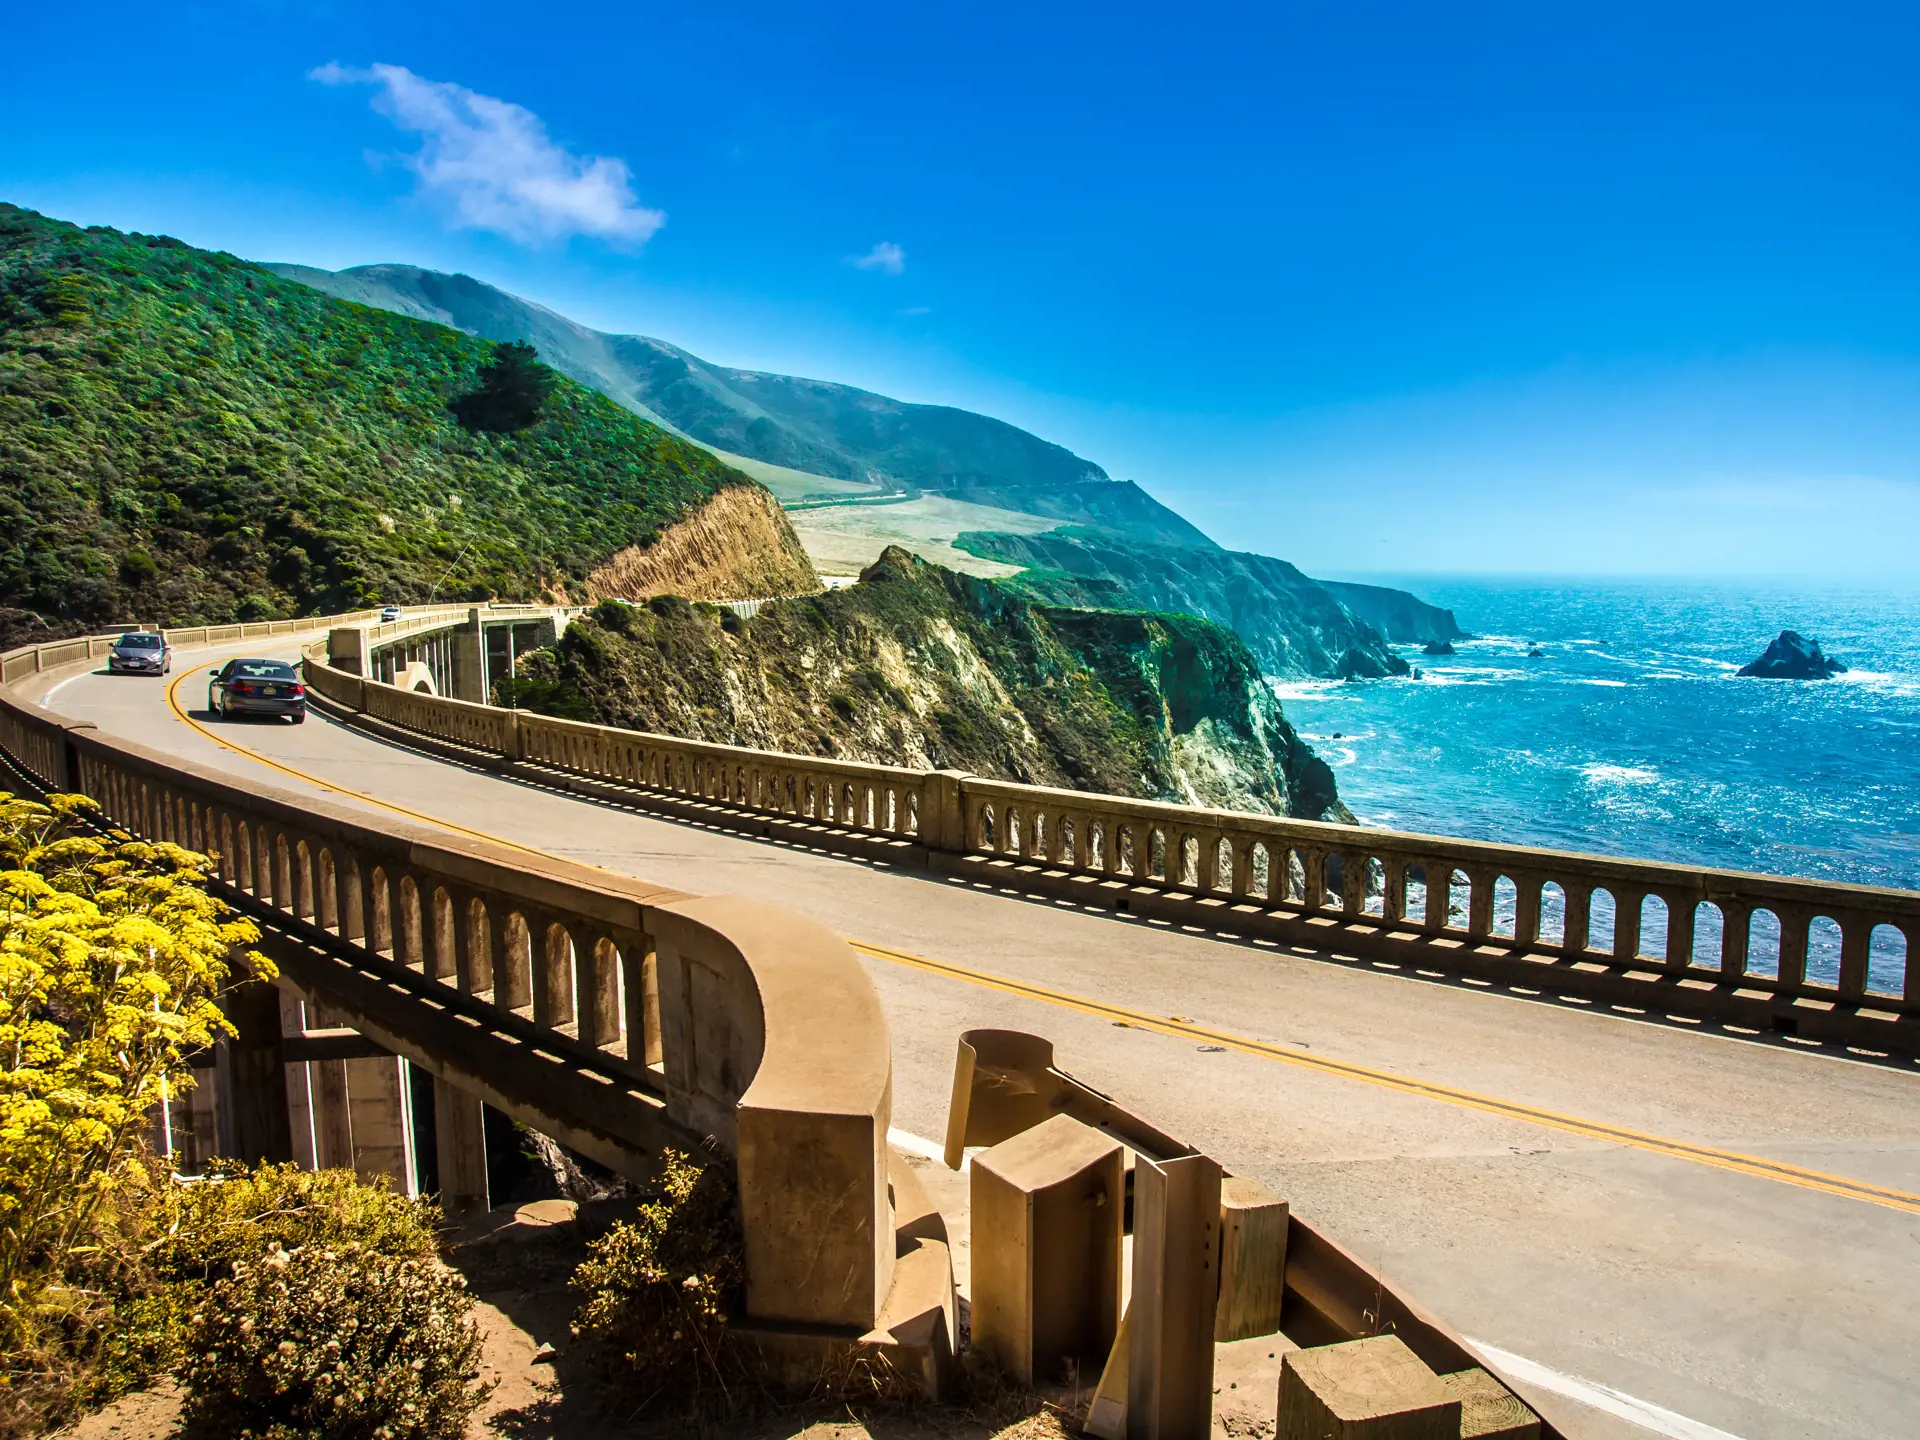 shutterstock_389893837 Bixby Creek Bridge on Highway #1 at the US West Coast traveling south to Los Angeles, Big Sur Area.jpg